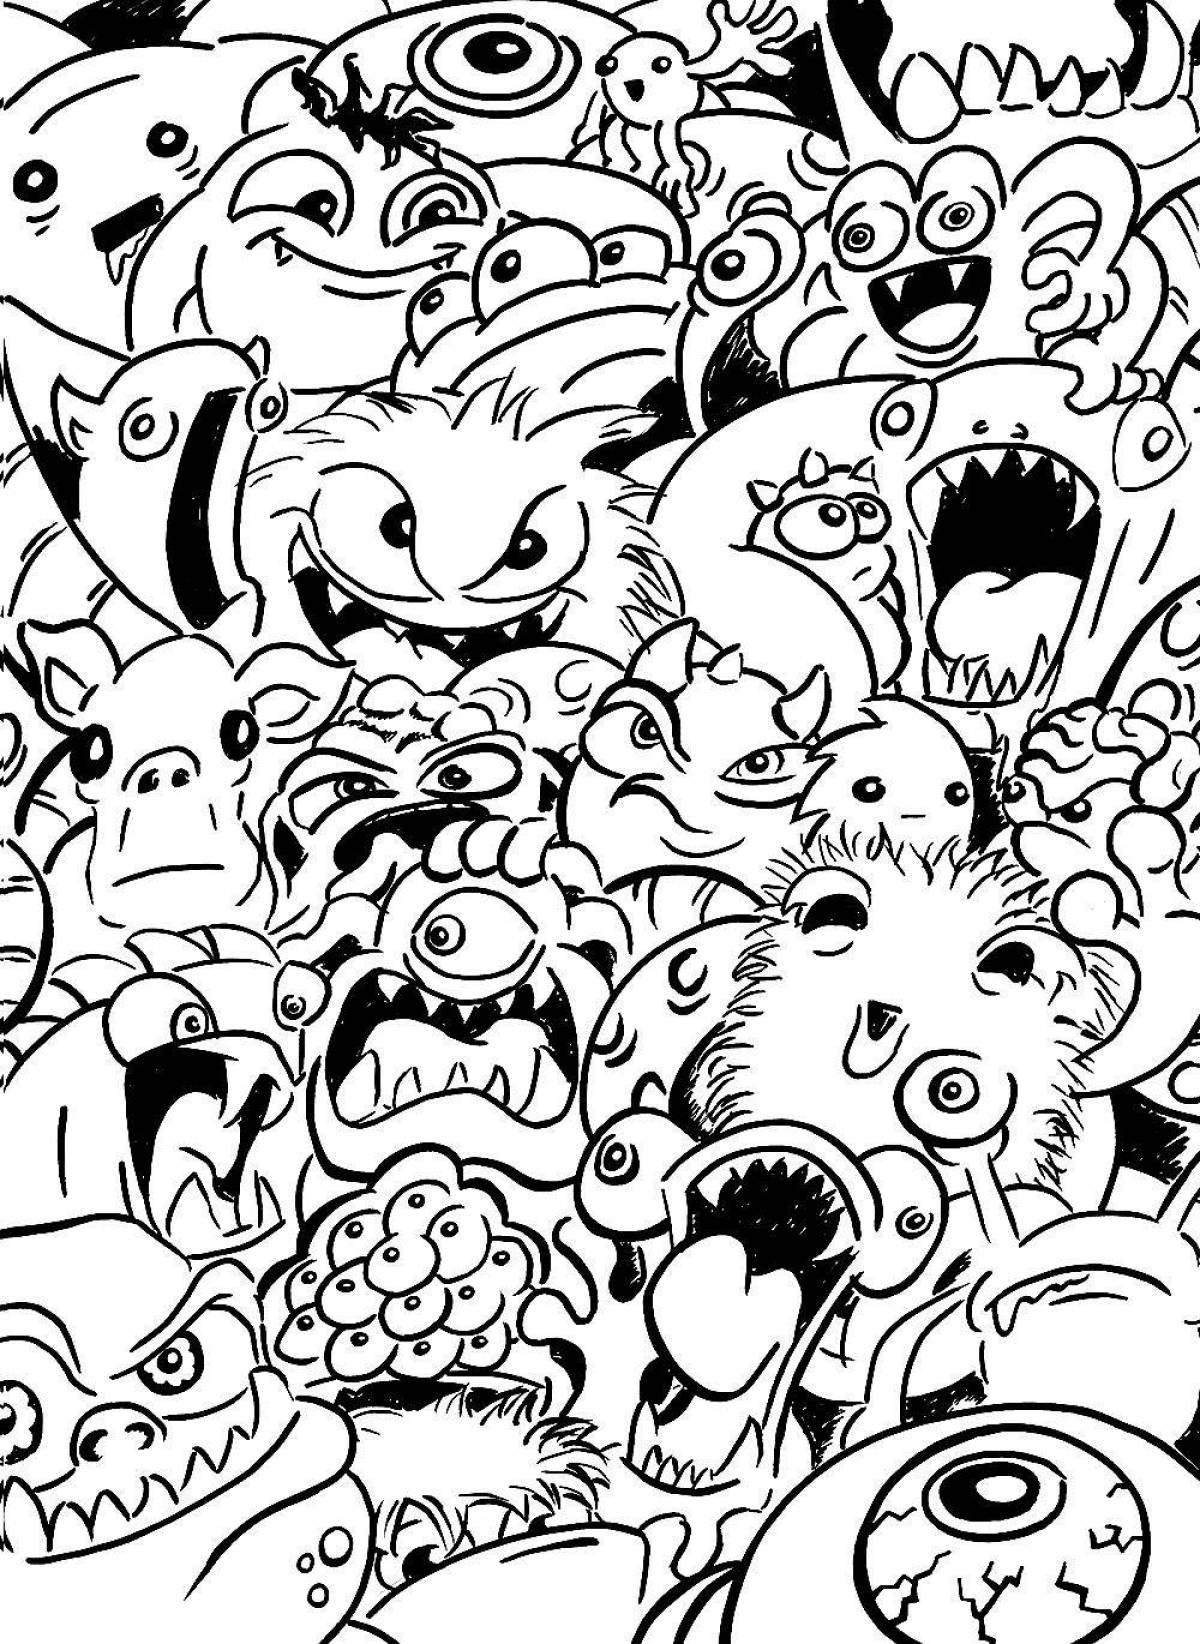 Cute maxi monsters coloring pages